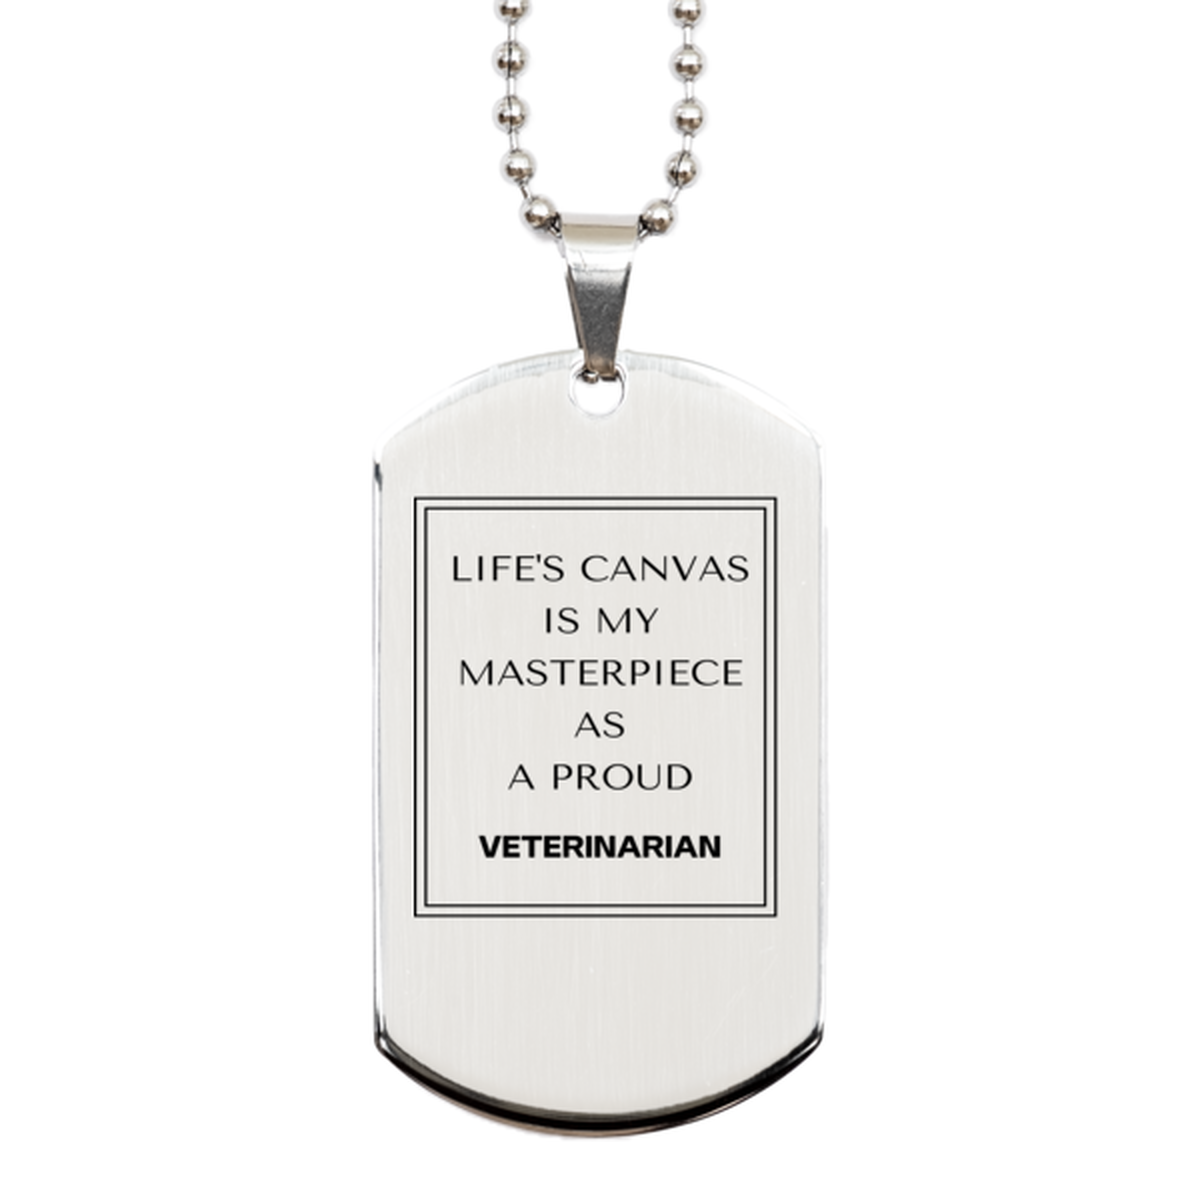 Proud Veterinarian Gifts, Life's canvas is my masterpiece, Epic Birthday Christmas Unique Silver Dog Tag For Veterinarian, Coworkers, Men, Women, Friends